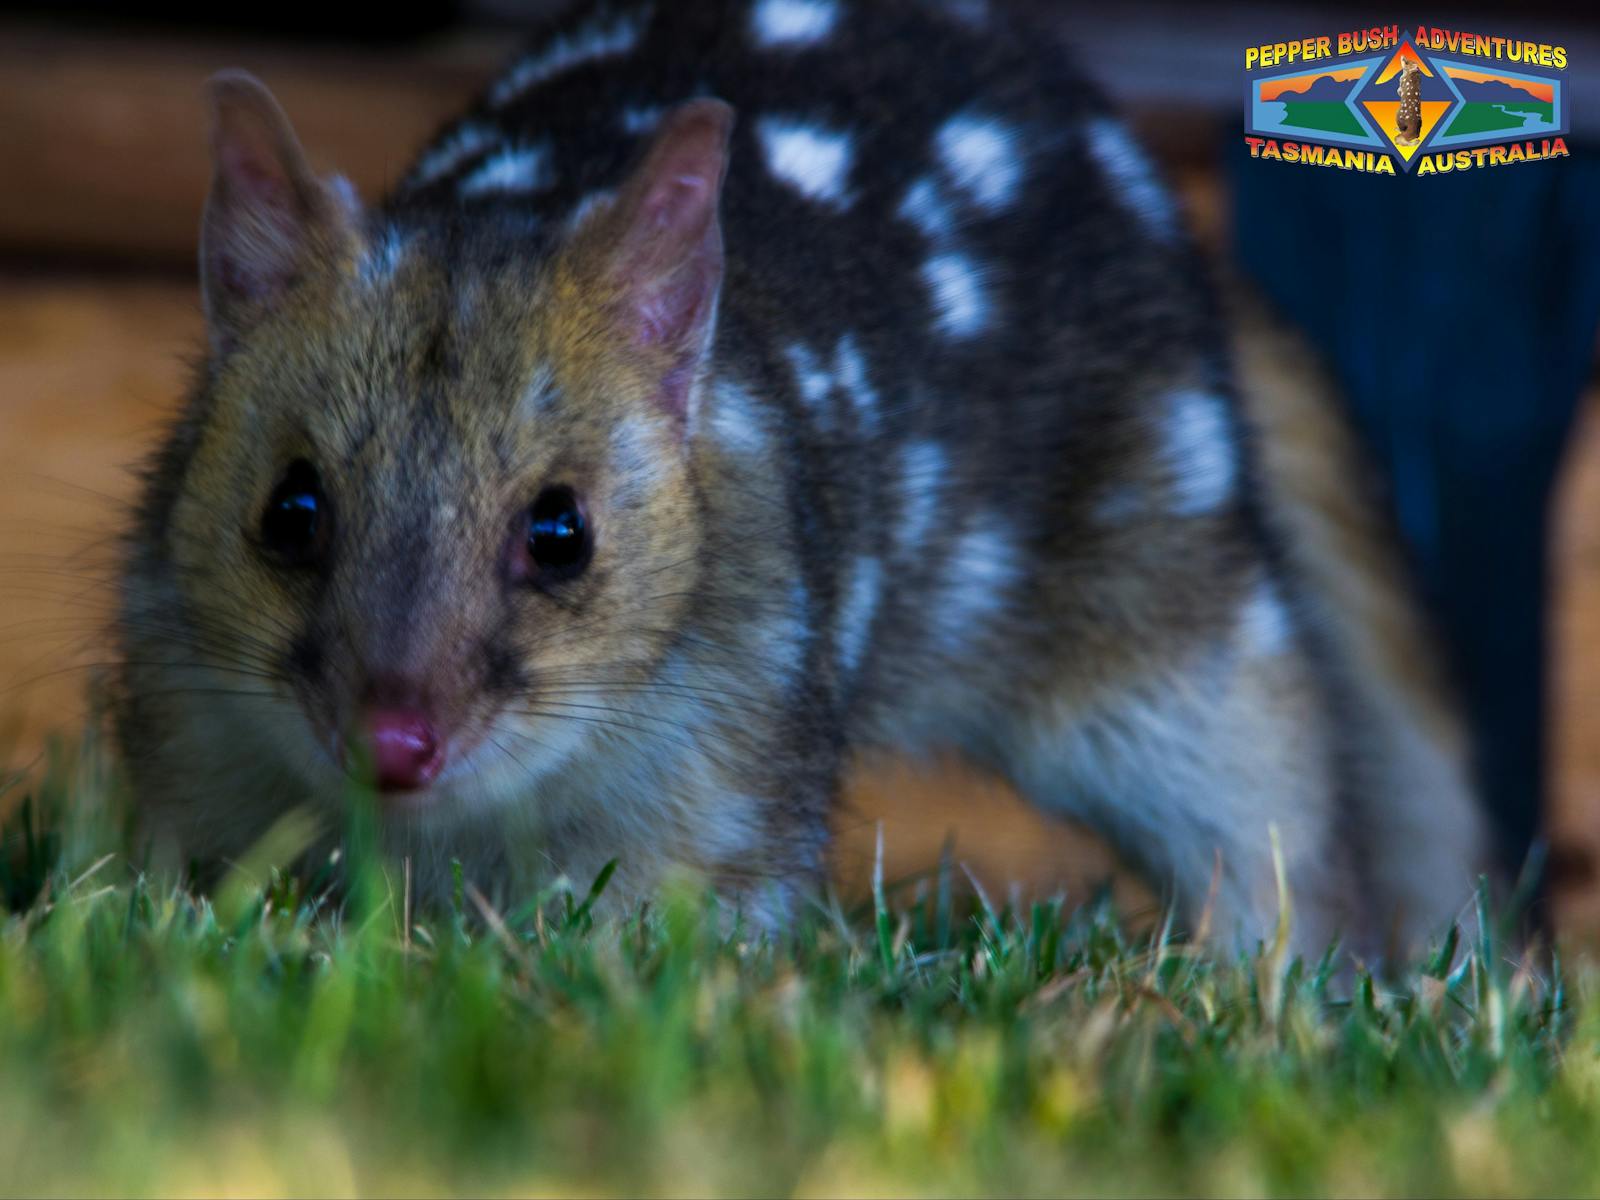 Fawn eastern quoll